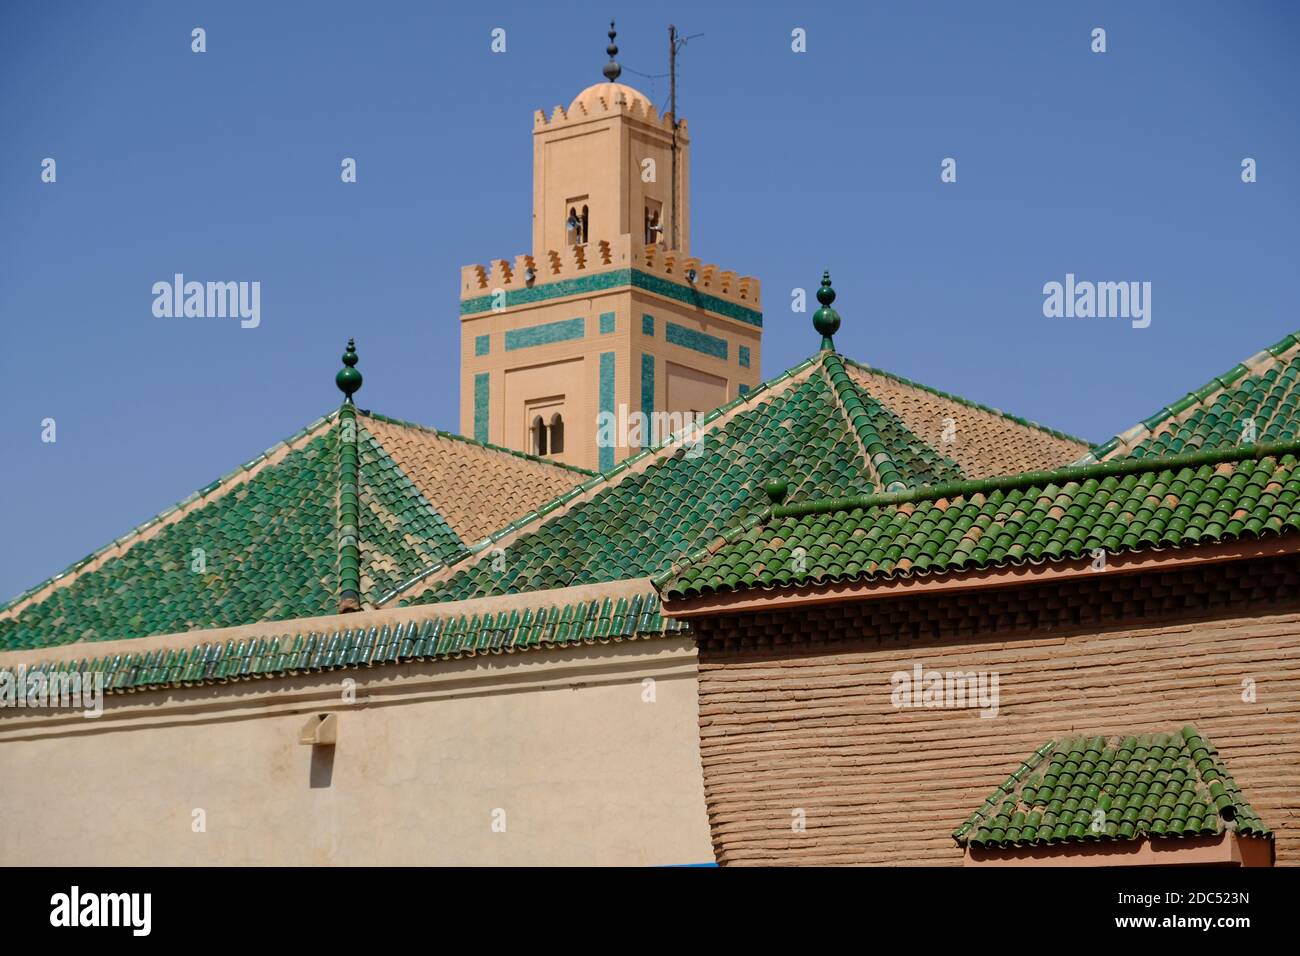 Morocco Marrakesh - Moulay el Yazid Mosque with green rooftops Stock Photo